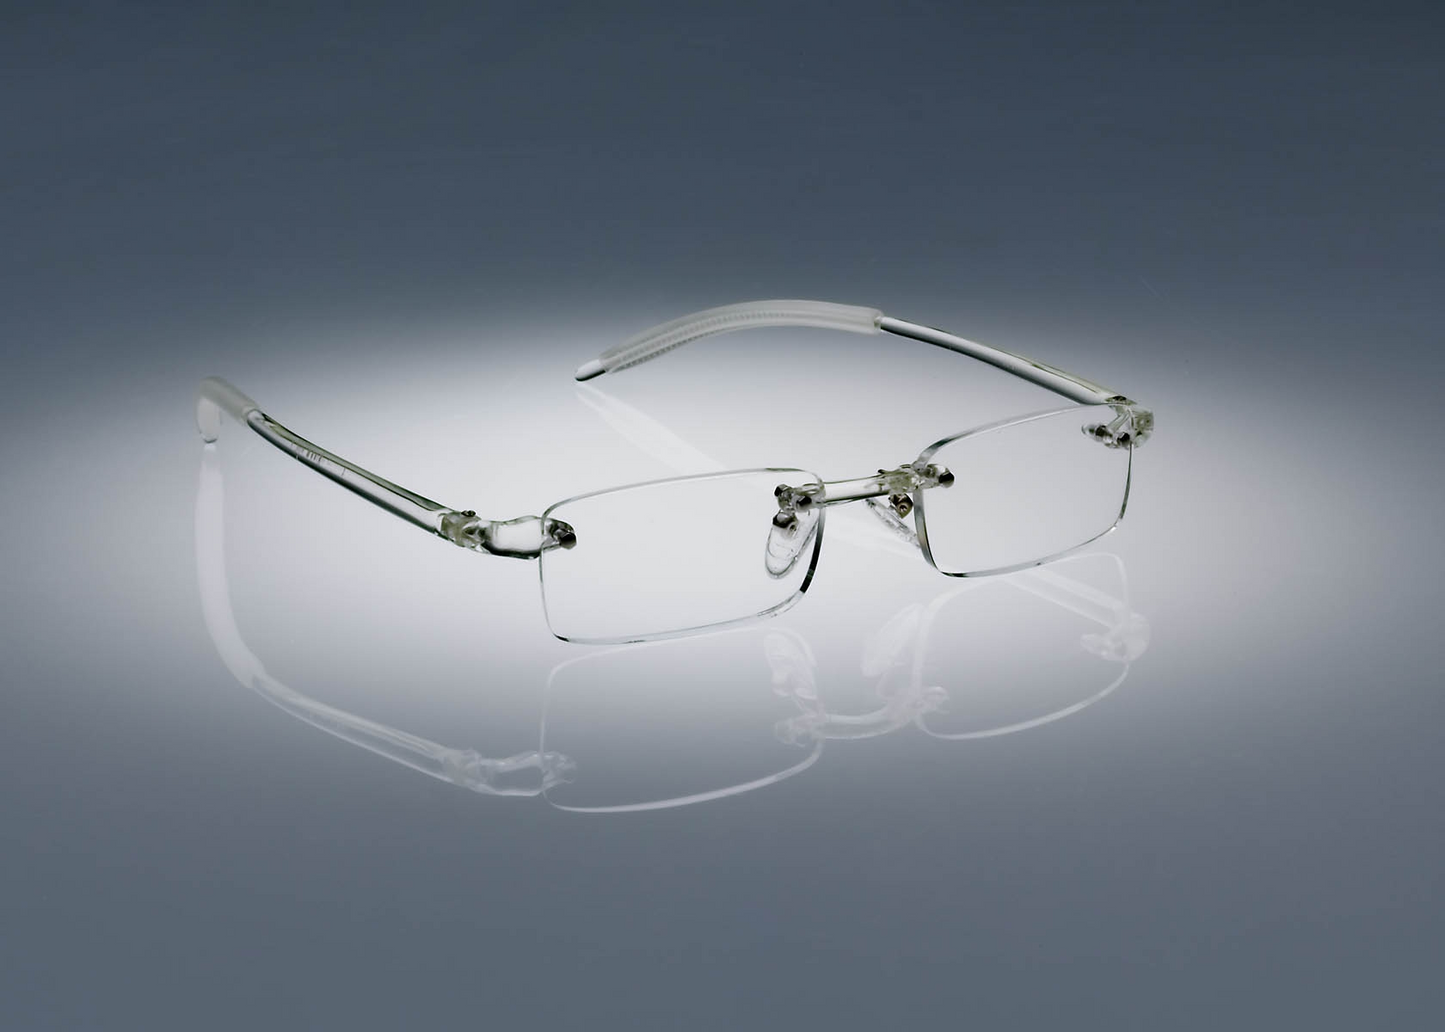 A pair of clear colored Ultimate Reading Glasses resting on a table, illuminated by a soft spotlight.